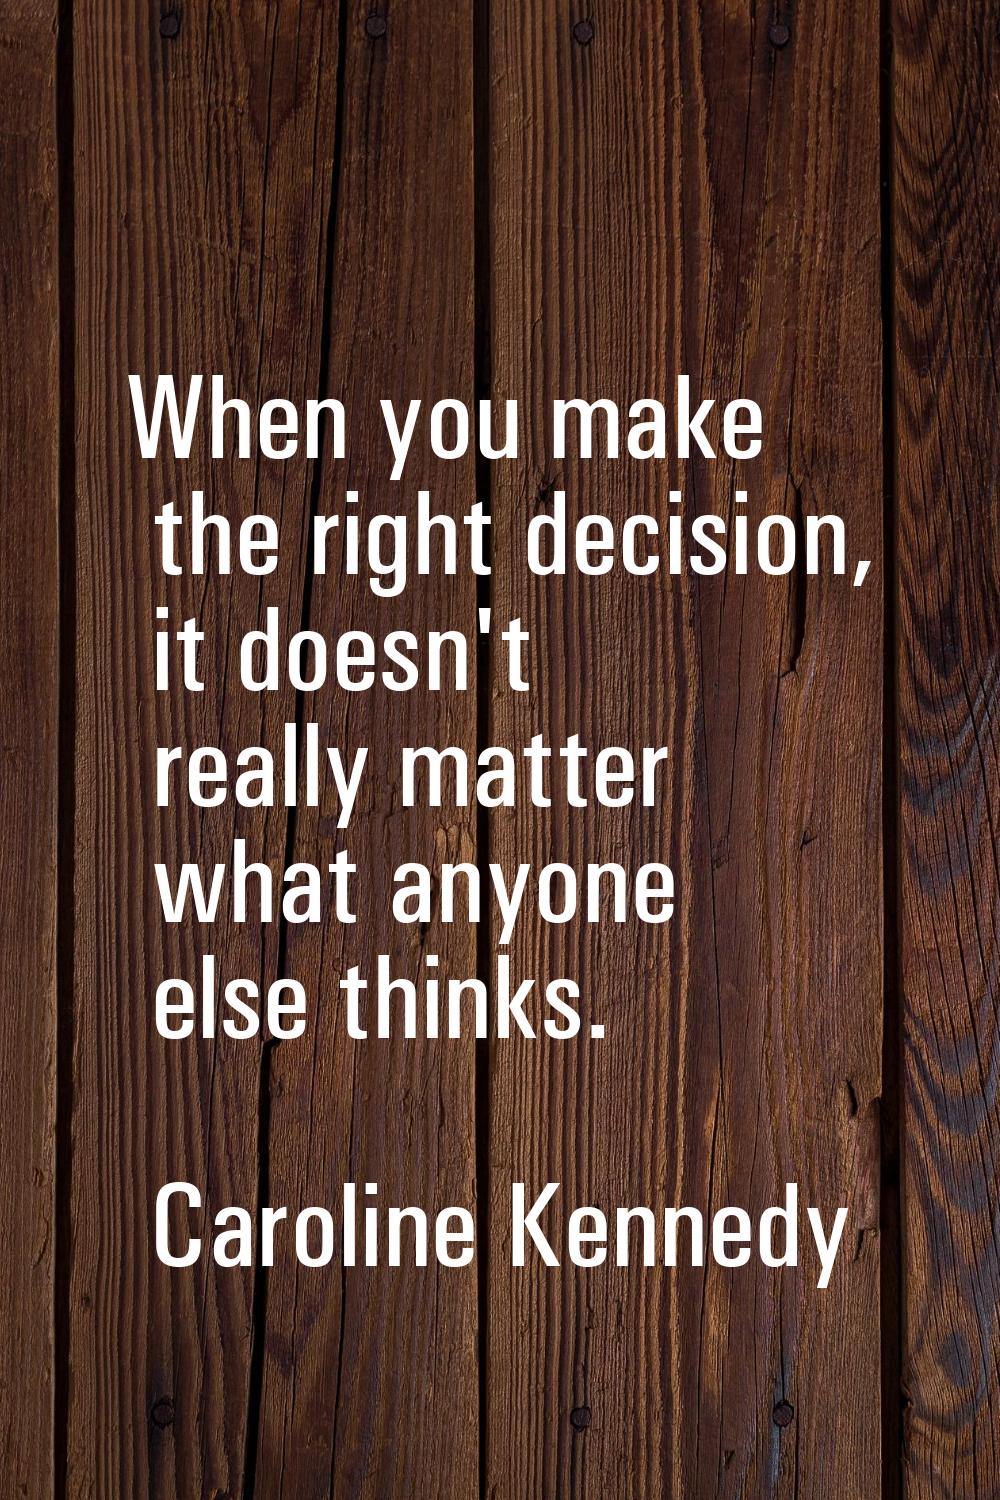 When you make the right decision, it doesn't really matter what anyone else thinks.